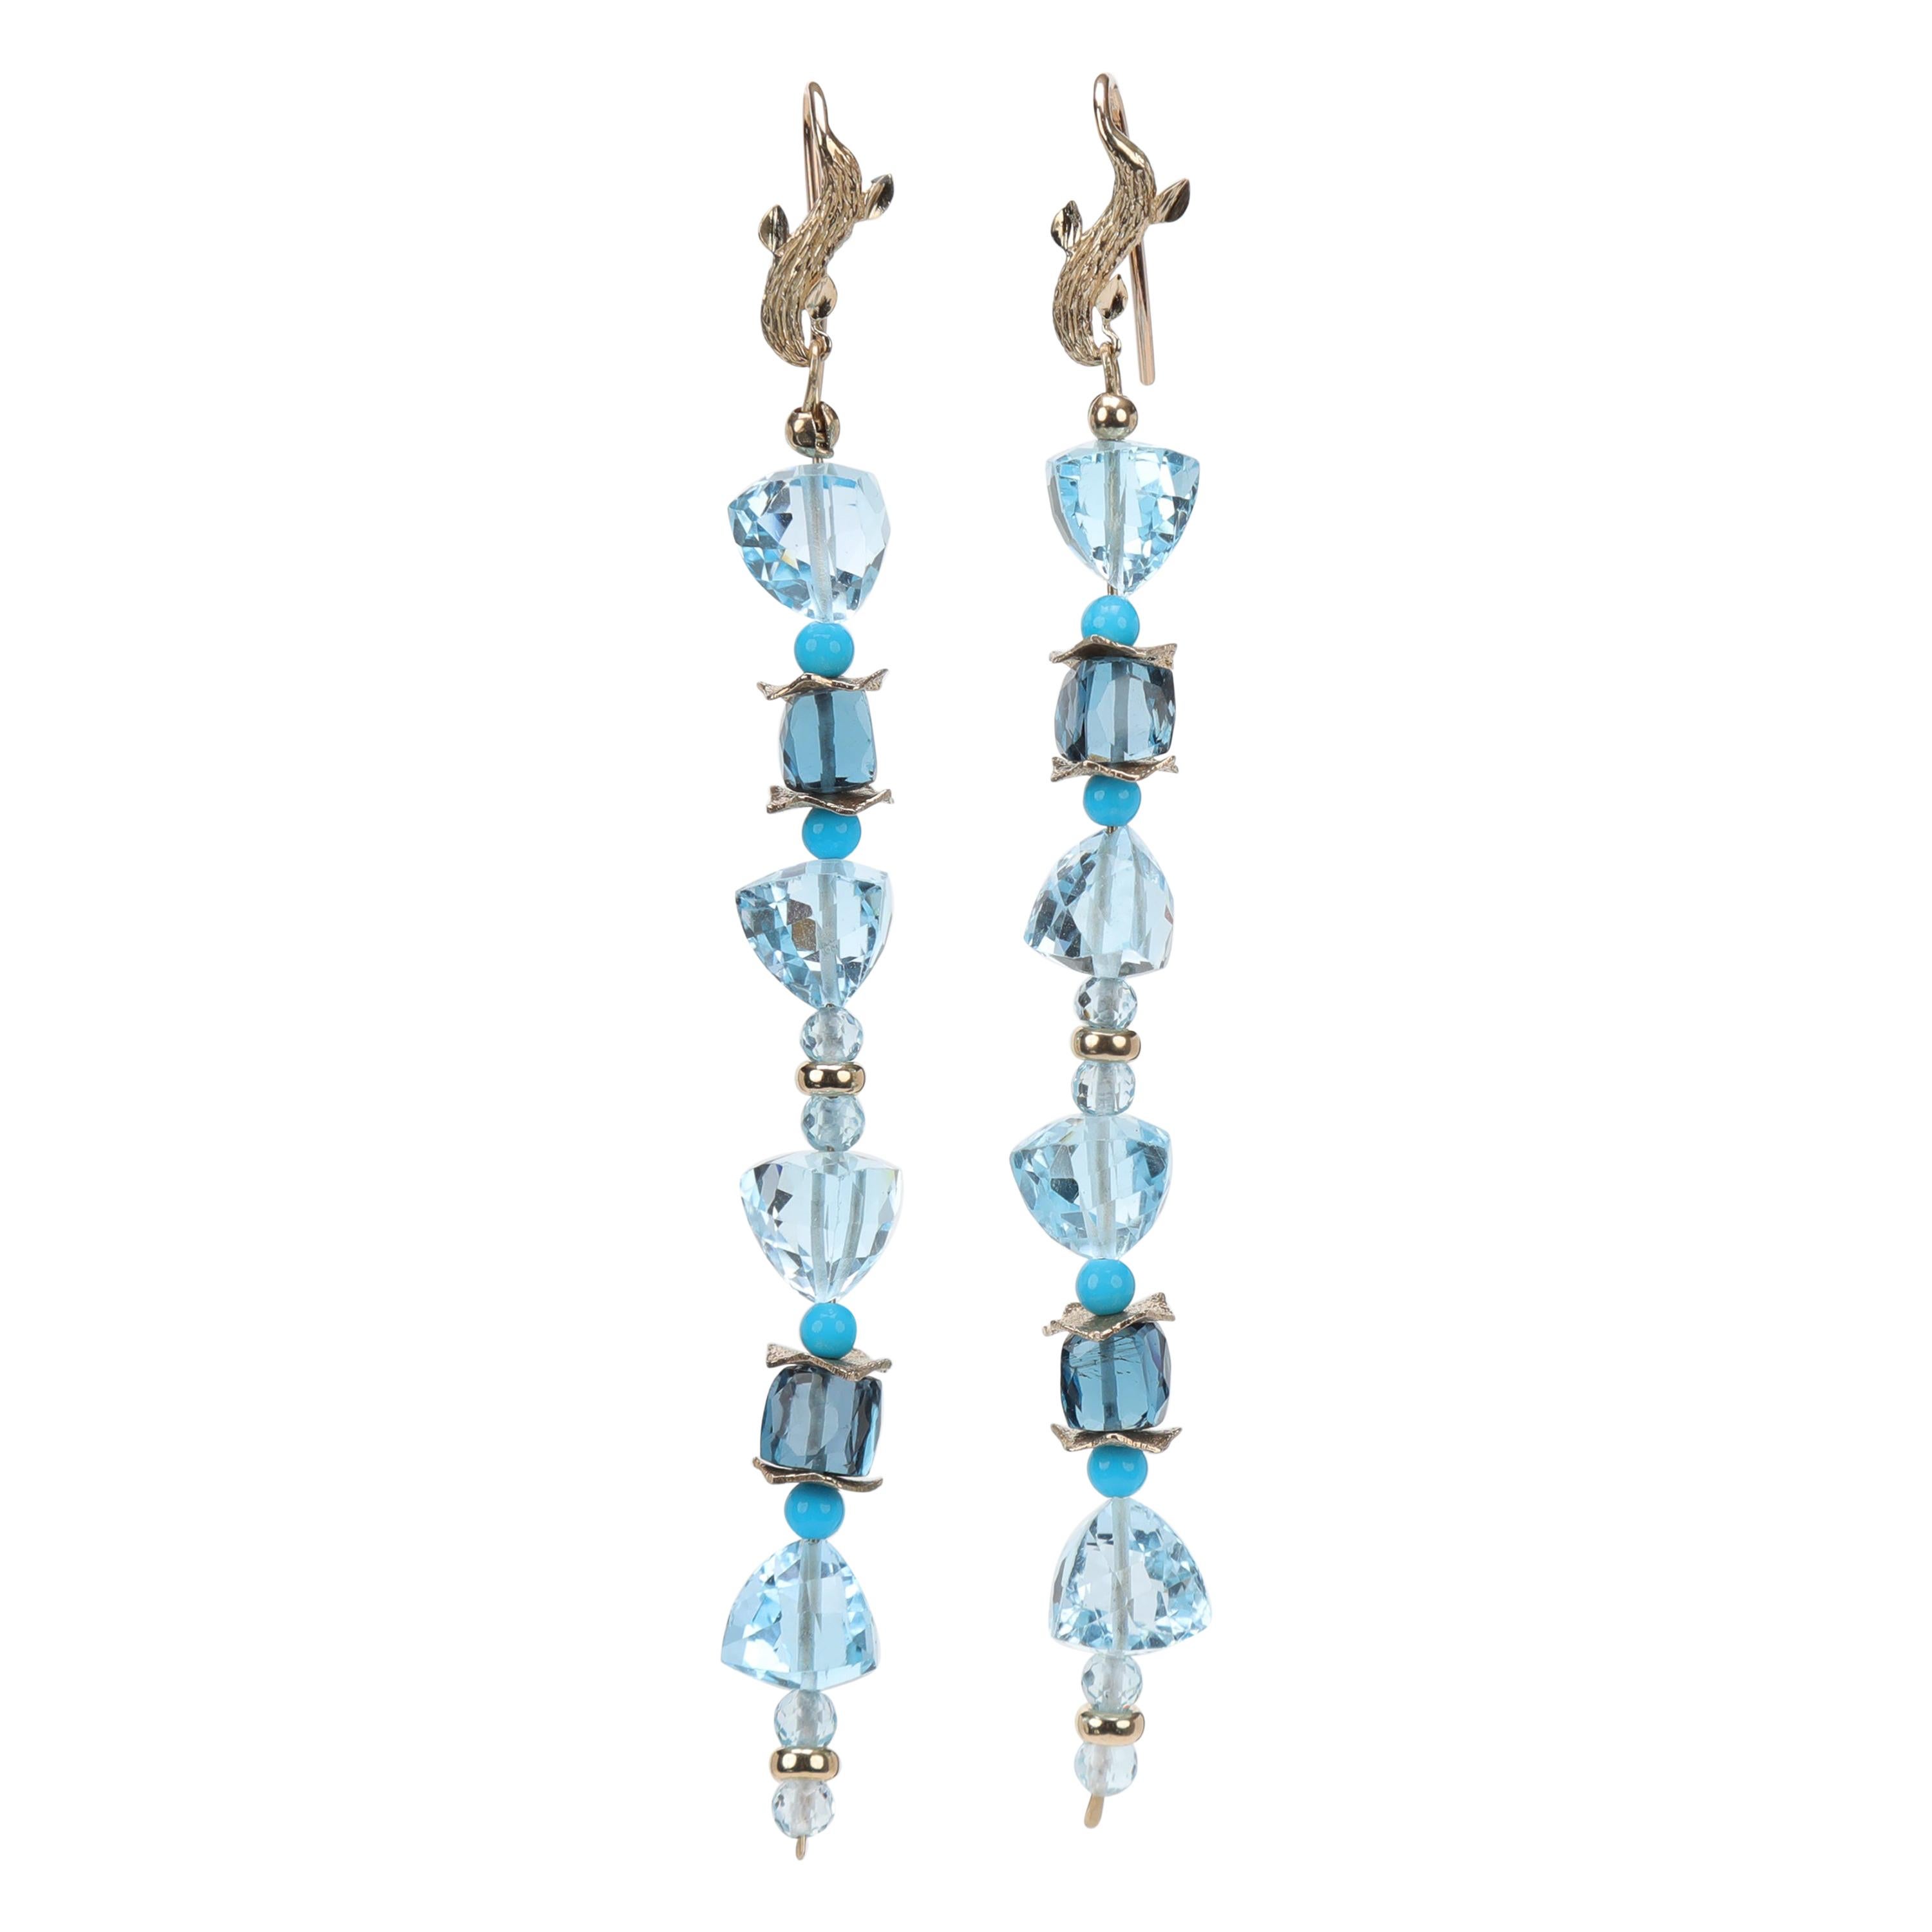 Dangle Earrings: Blue Topaz, Turquoise, and Gold 